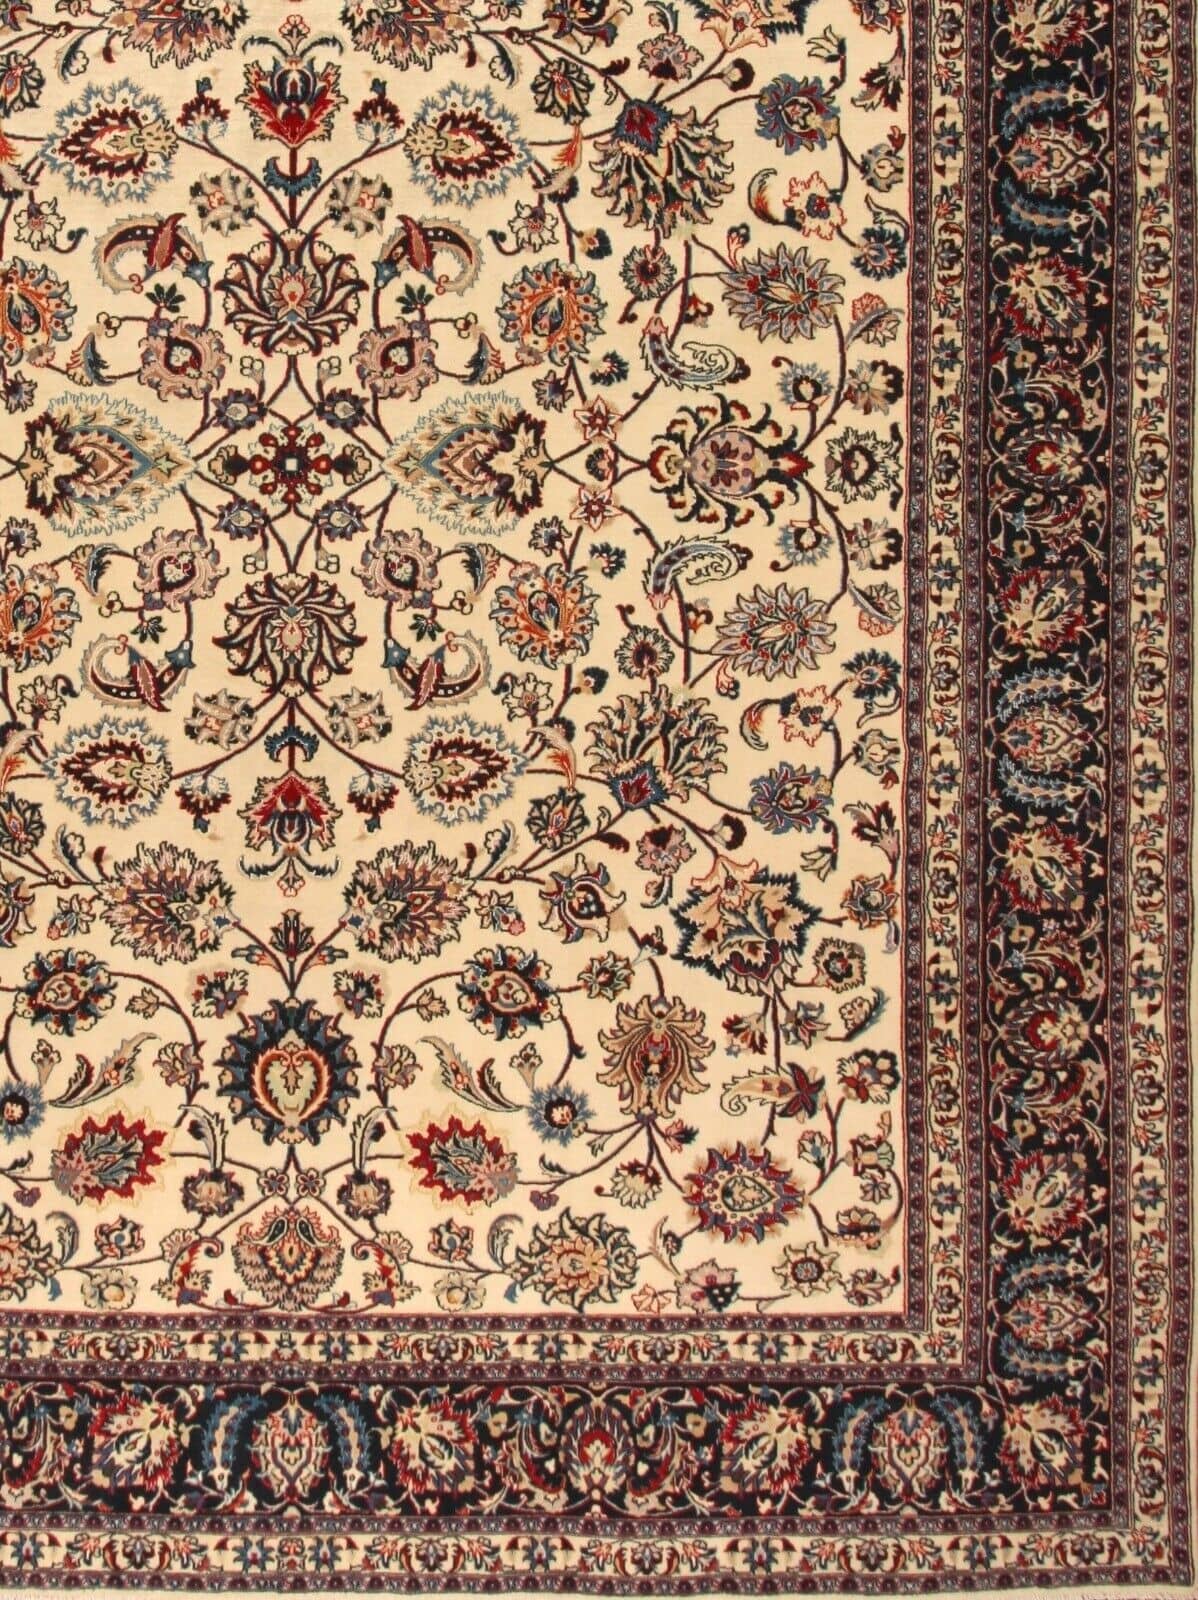 Detailed shot of the wool material used in the Handmade Contemporary Persian Style Tabriz Rug